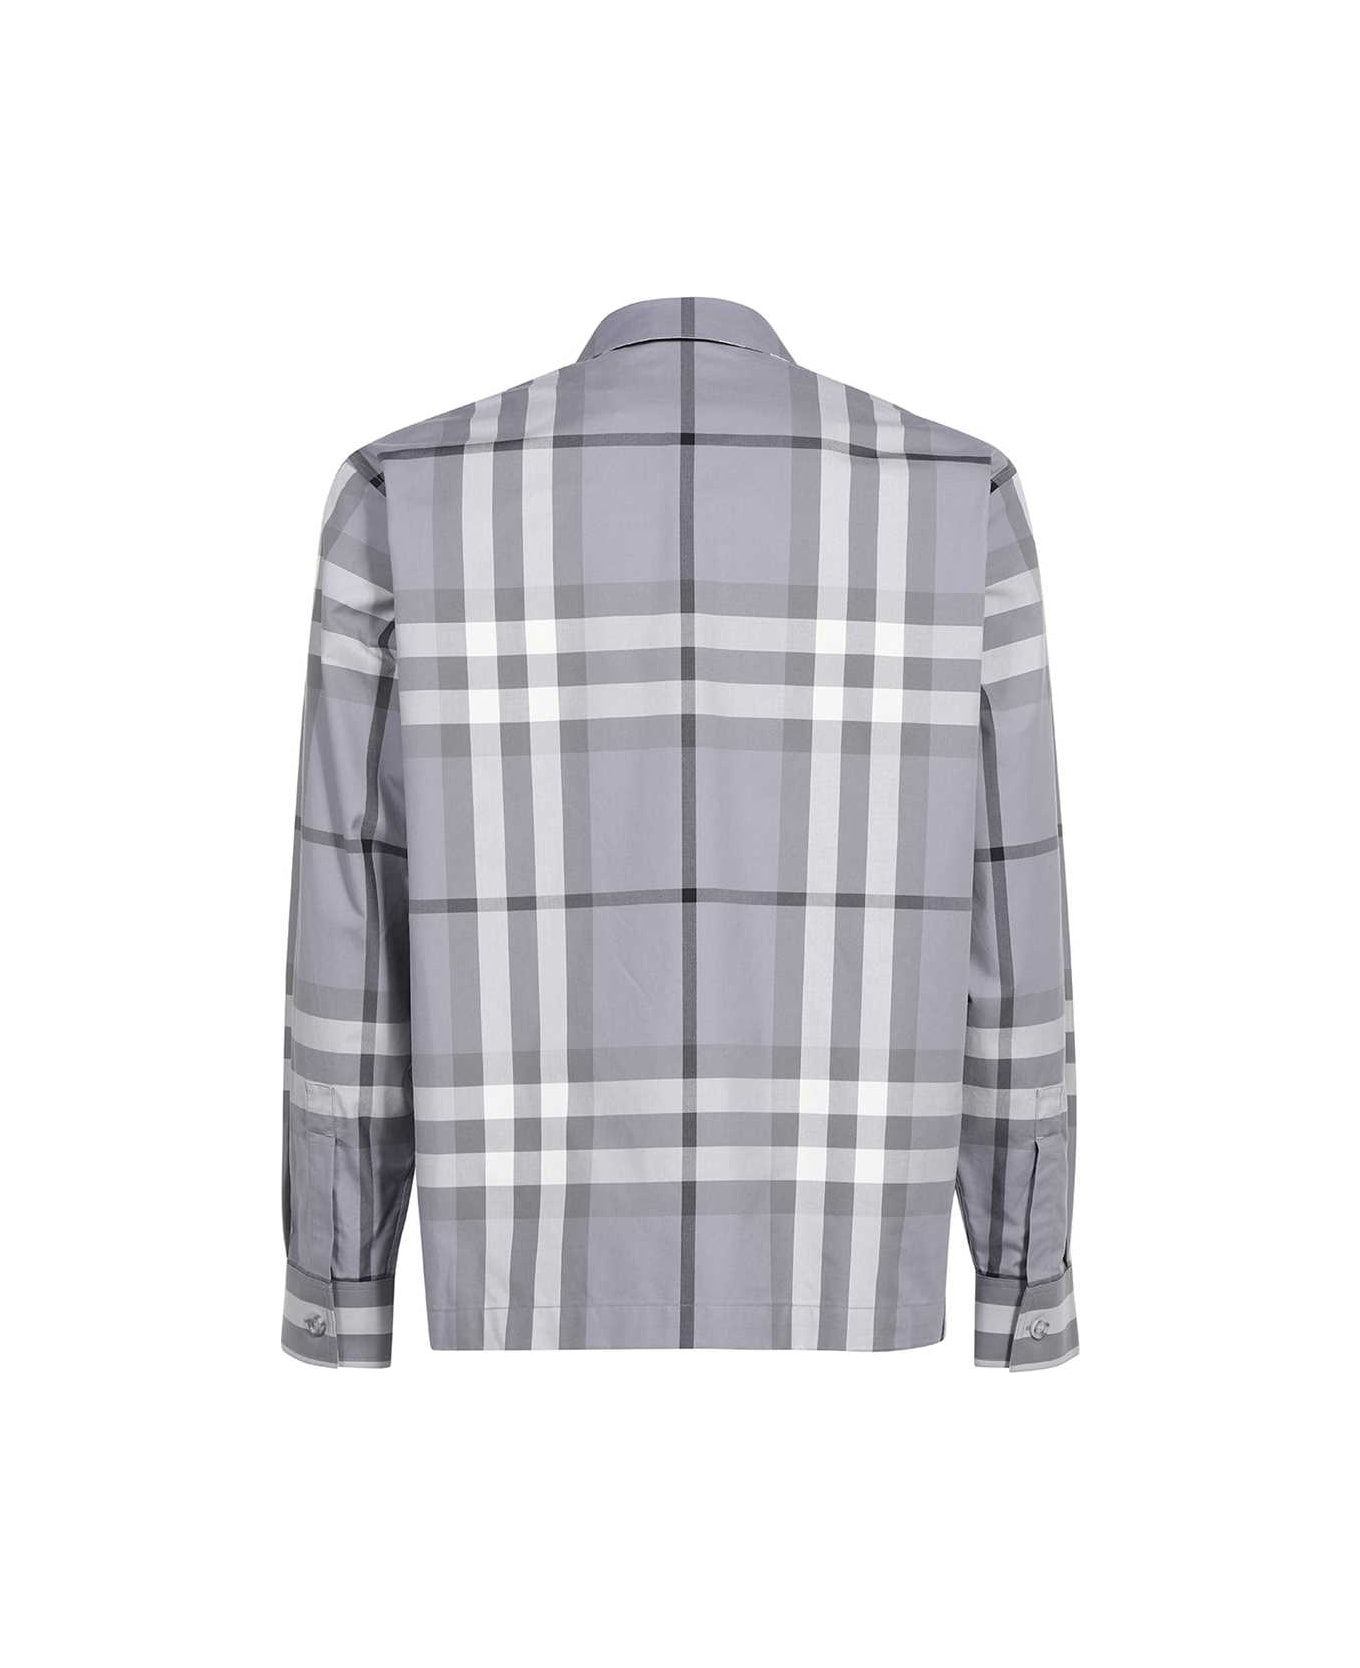 Burberry Checked Cotton Shirt - grey シャツ